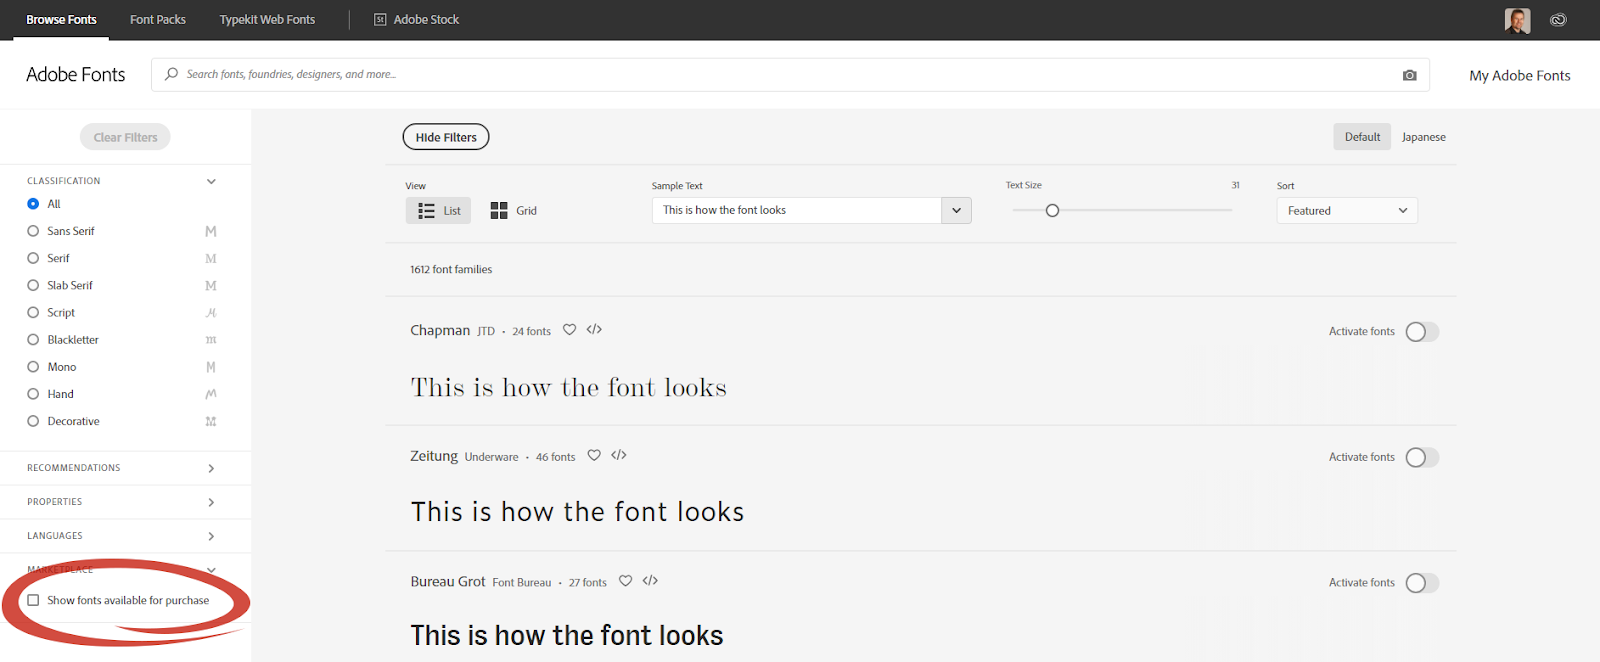 Free fonts from Adobe